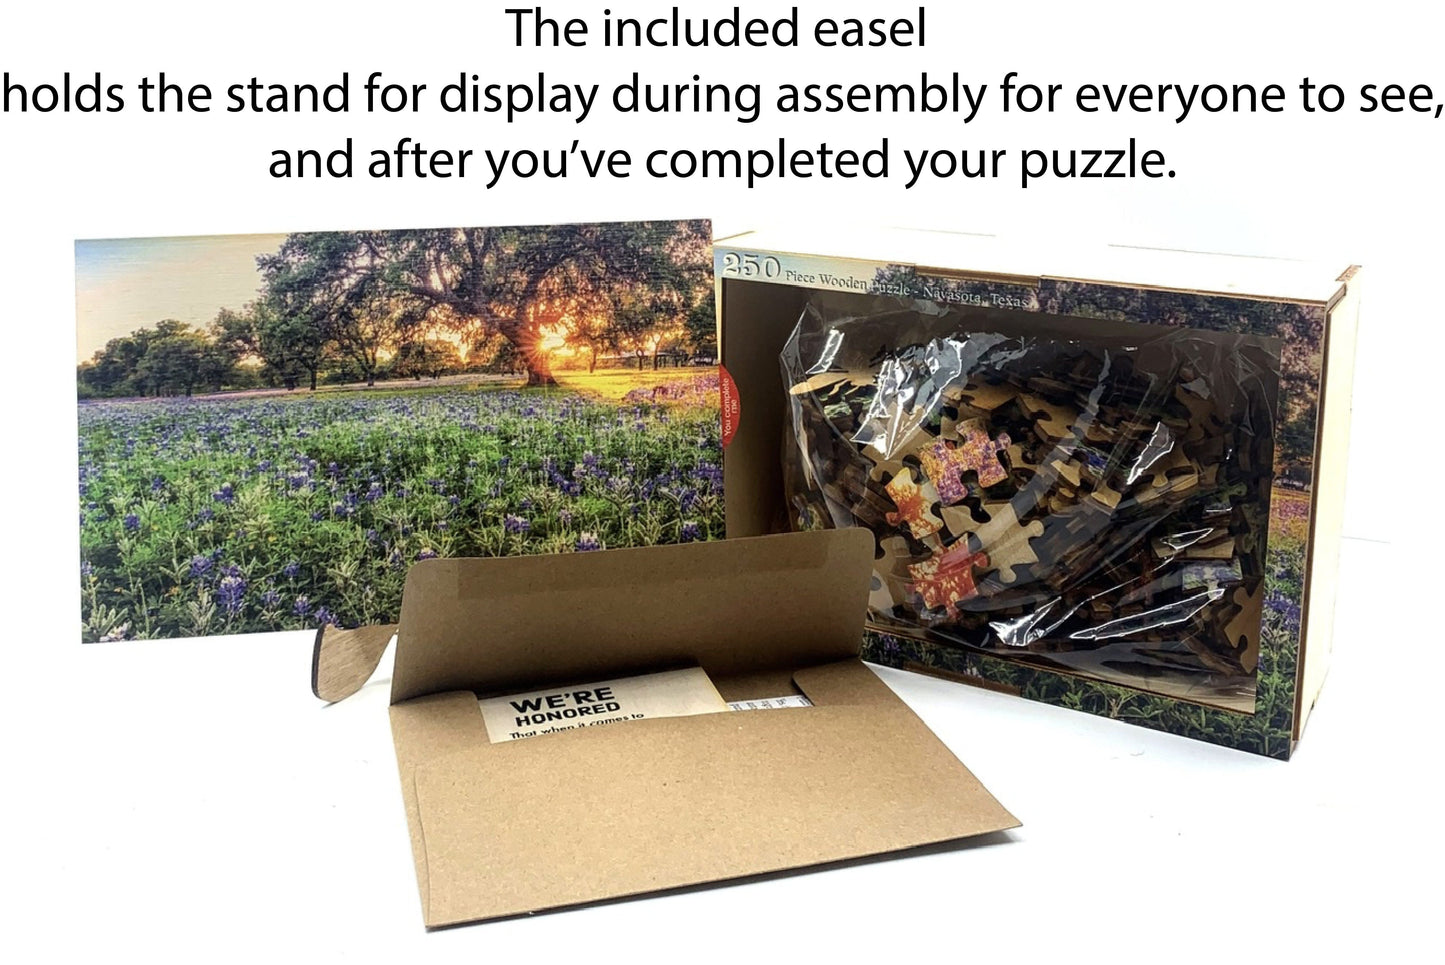 Wimberley Puzzle Company Artist Signature Series Jigsaw Puzzle Texas Roadside Bluebonnets | Wildflower Puzzle | 250, 500, 1000 Pieces